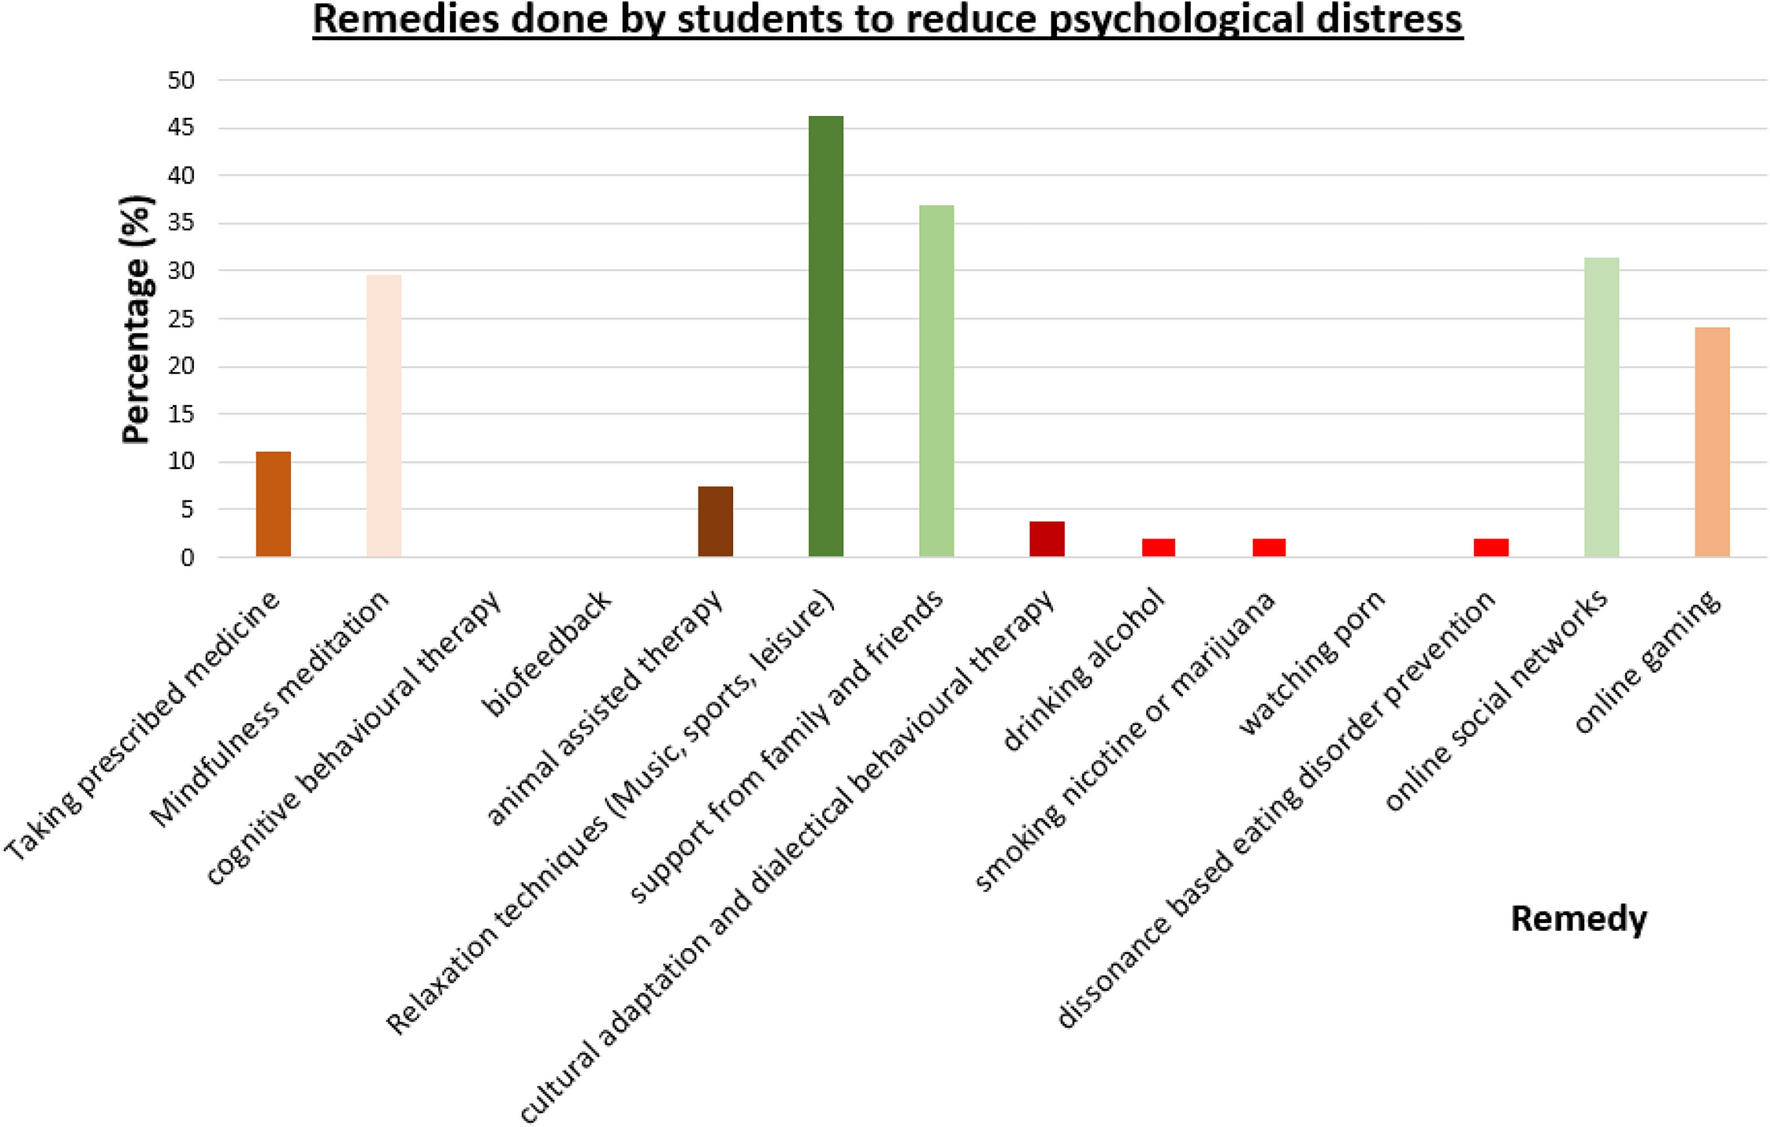 A study in University of Ruhuna for investigating prevalence, risk factors  and remedies for psychiatric illnesses among students | Scientific Reports